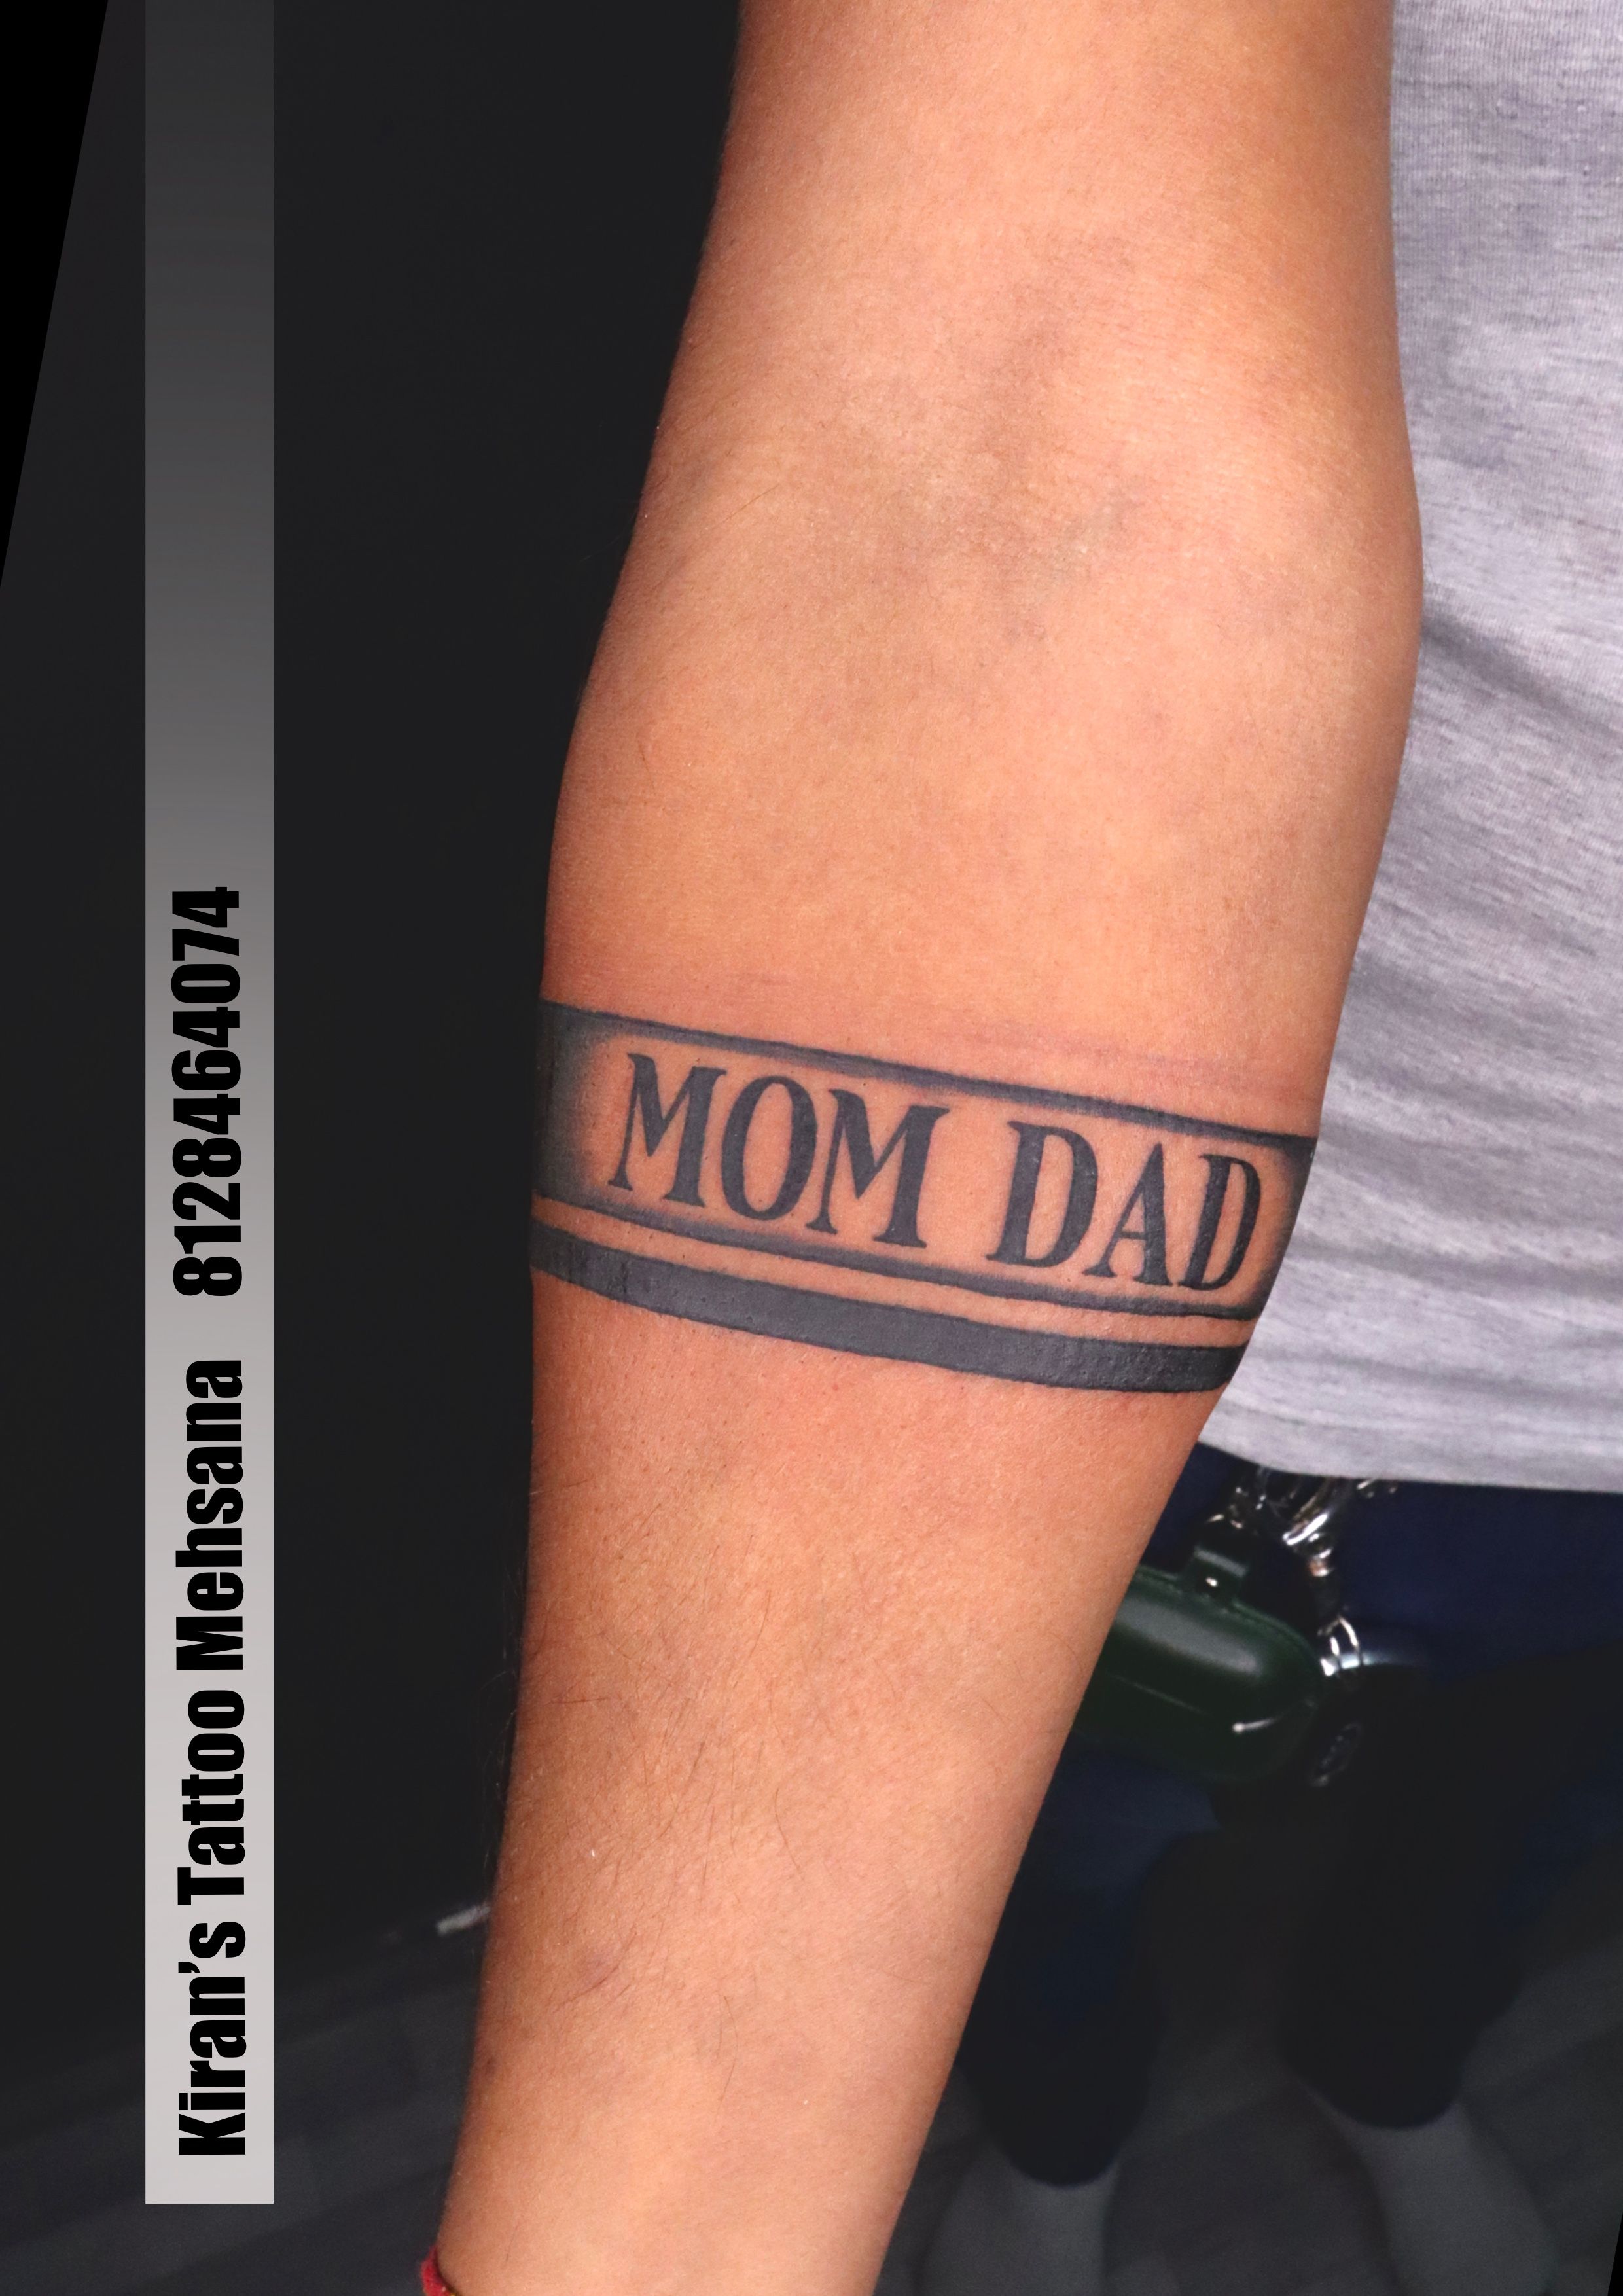 voorkoms Mom dad Hand band Temporary Tattoo